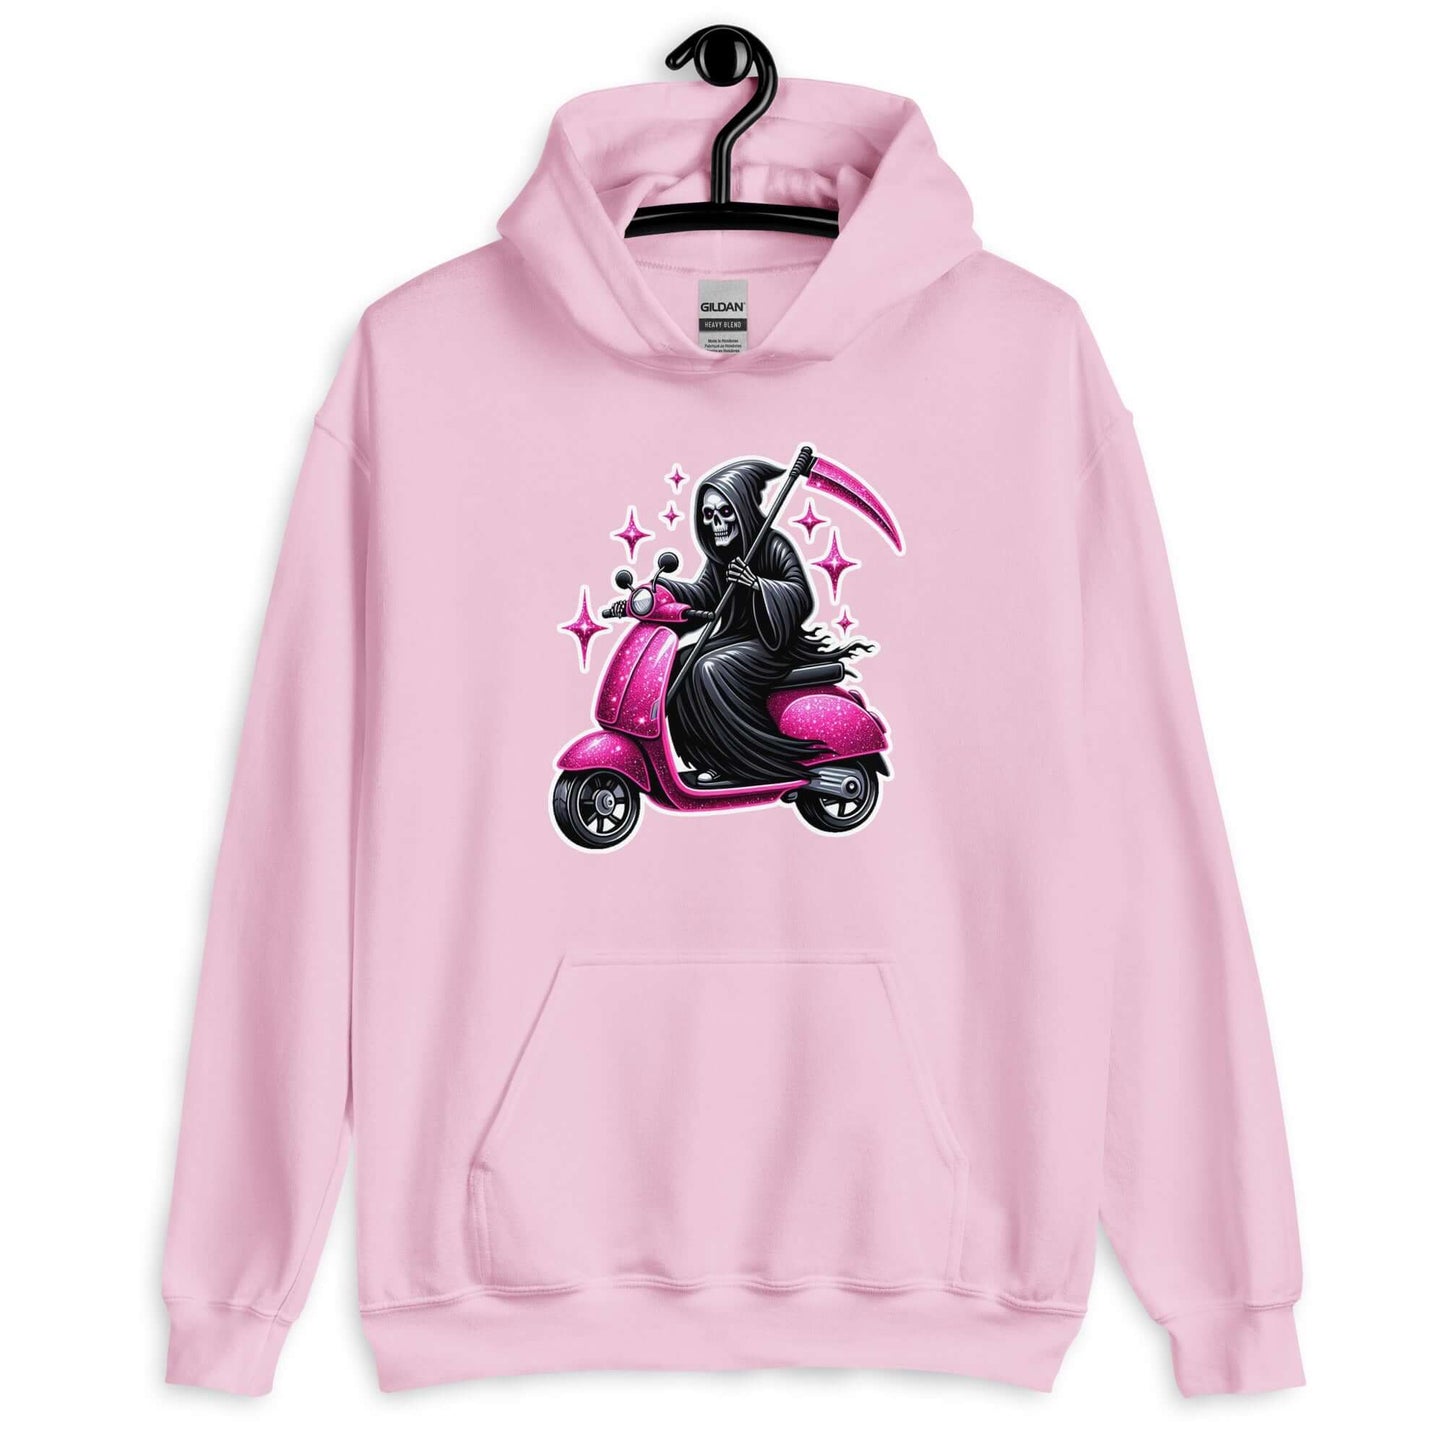 Grim reaper riding a scooter hoodie